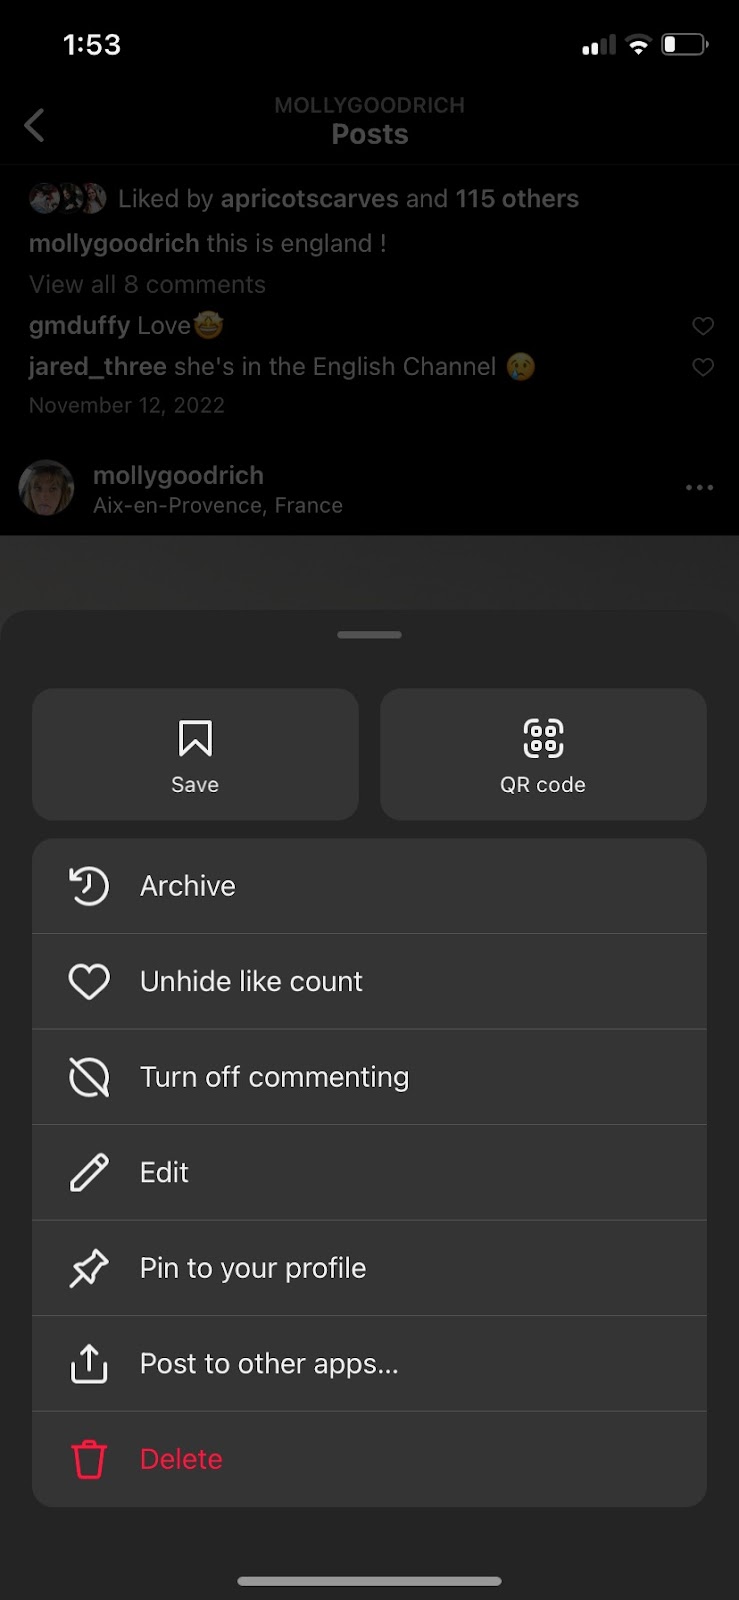 What Does Archive Mean On Instagram?